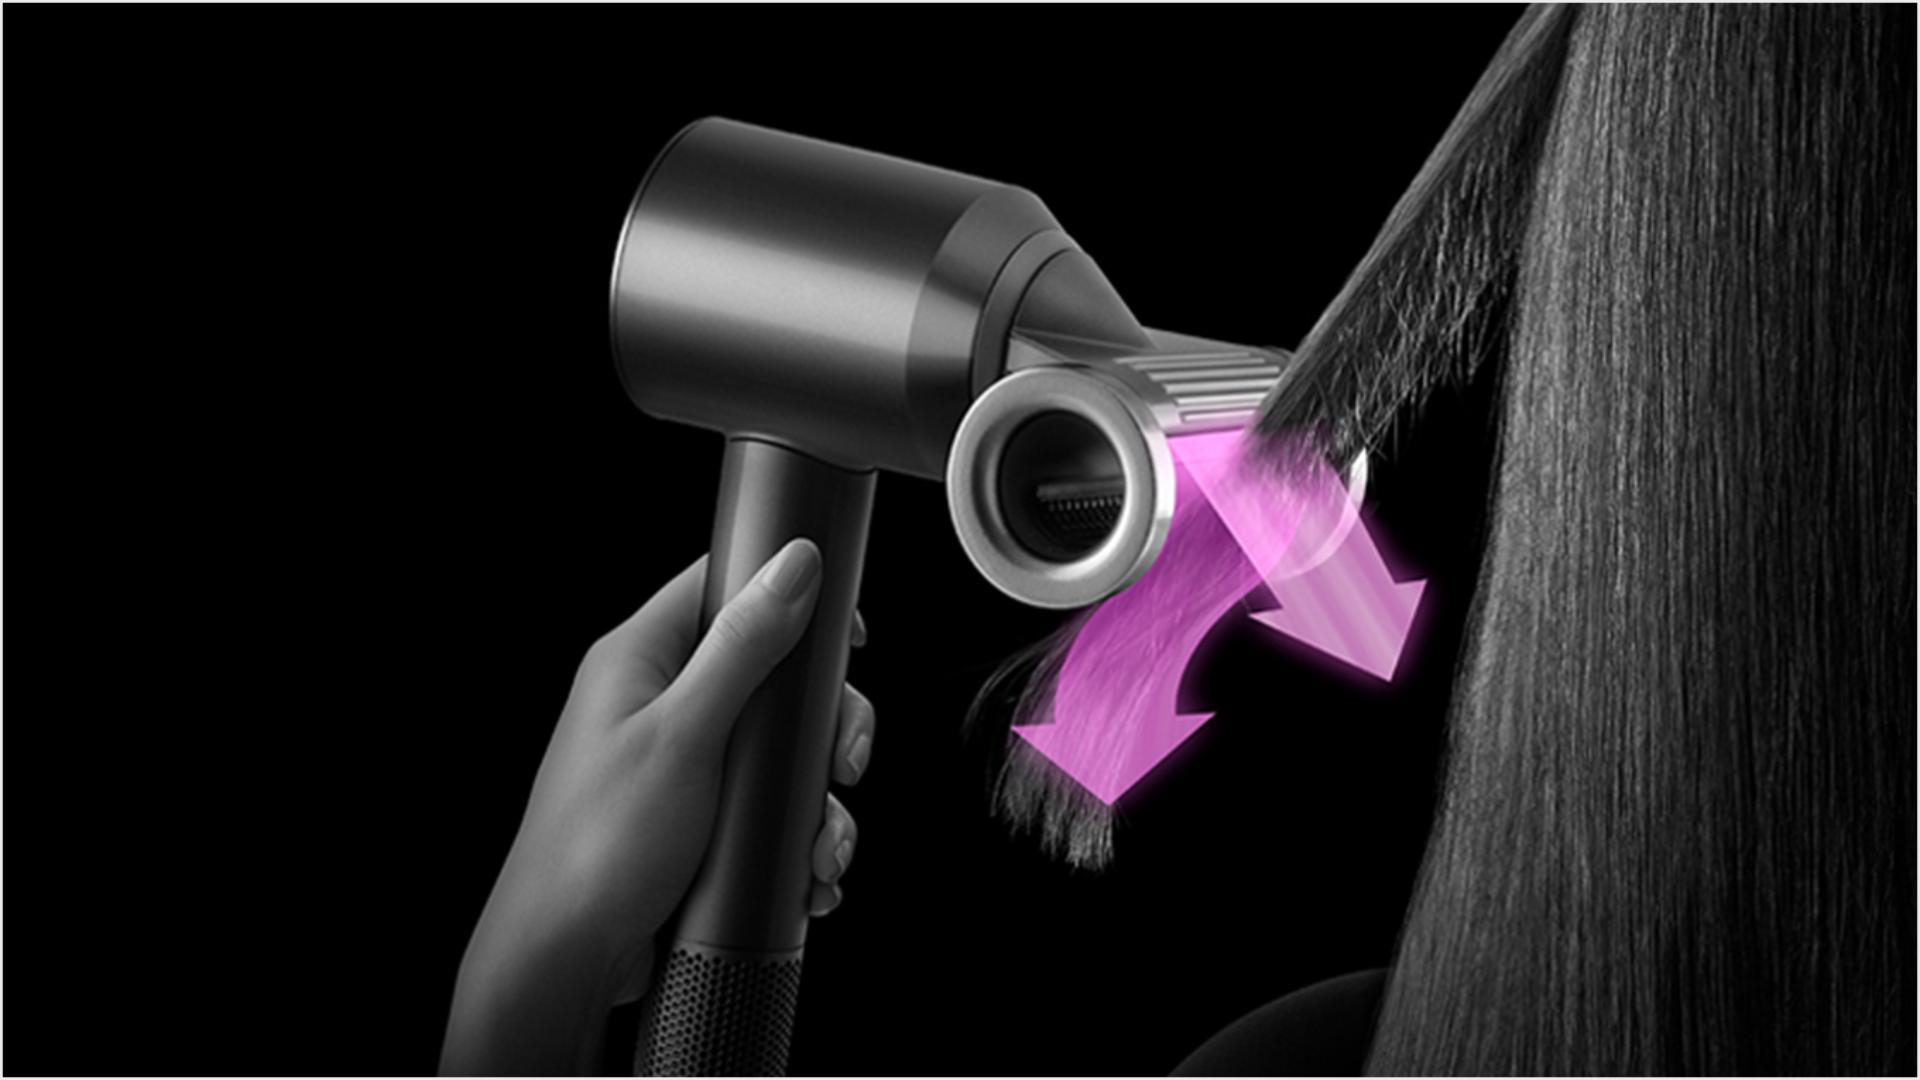 A tress of hair is styled using the Dyson Supersonic with Flyaway smoother attachment in Flyaway mode.